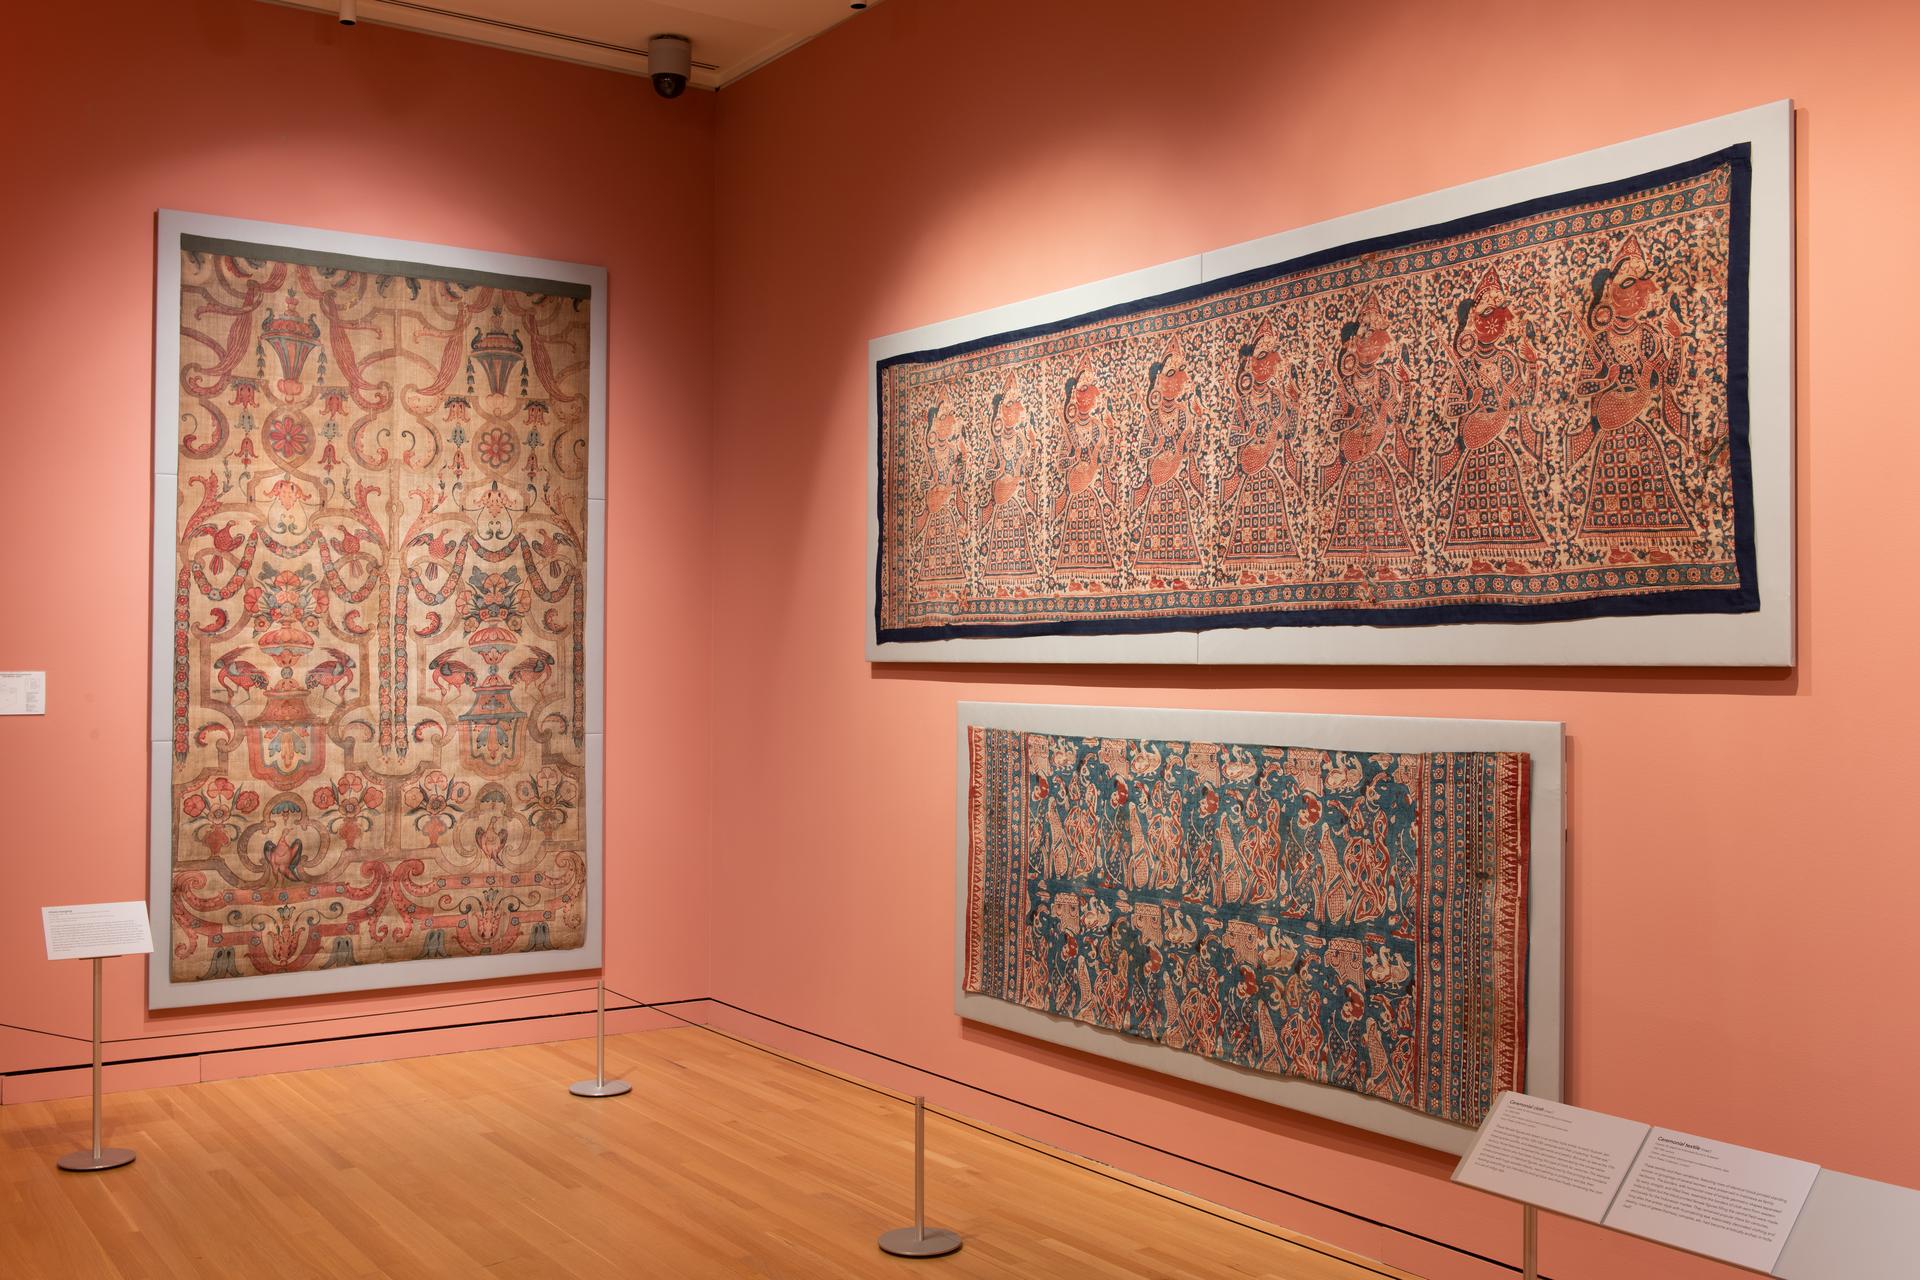 Pieces in "Indian Textiles"